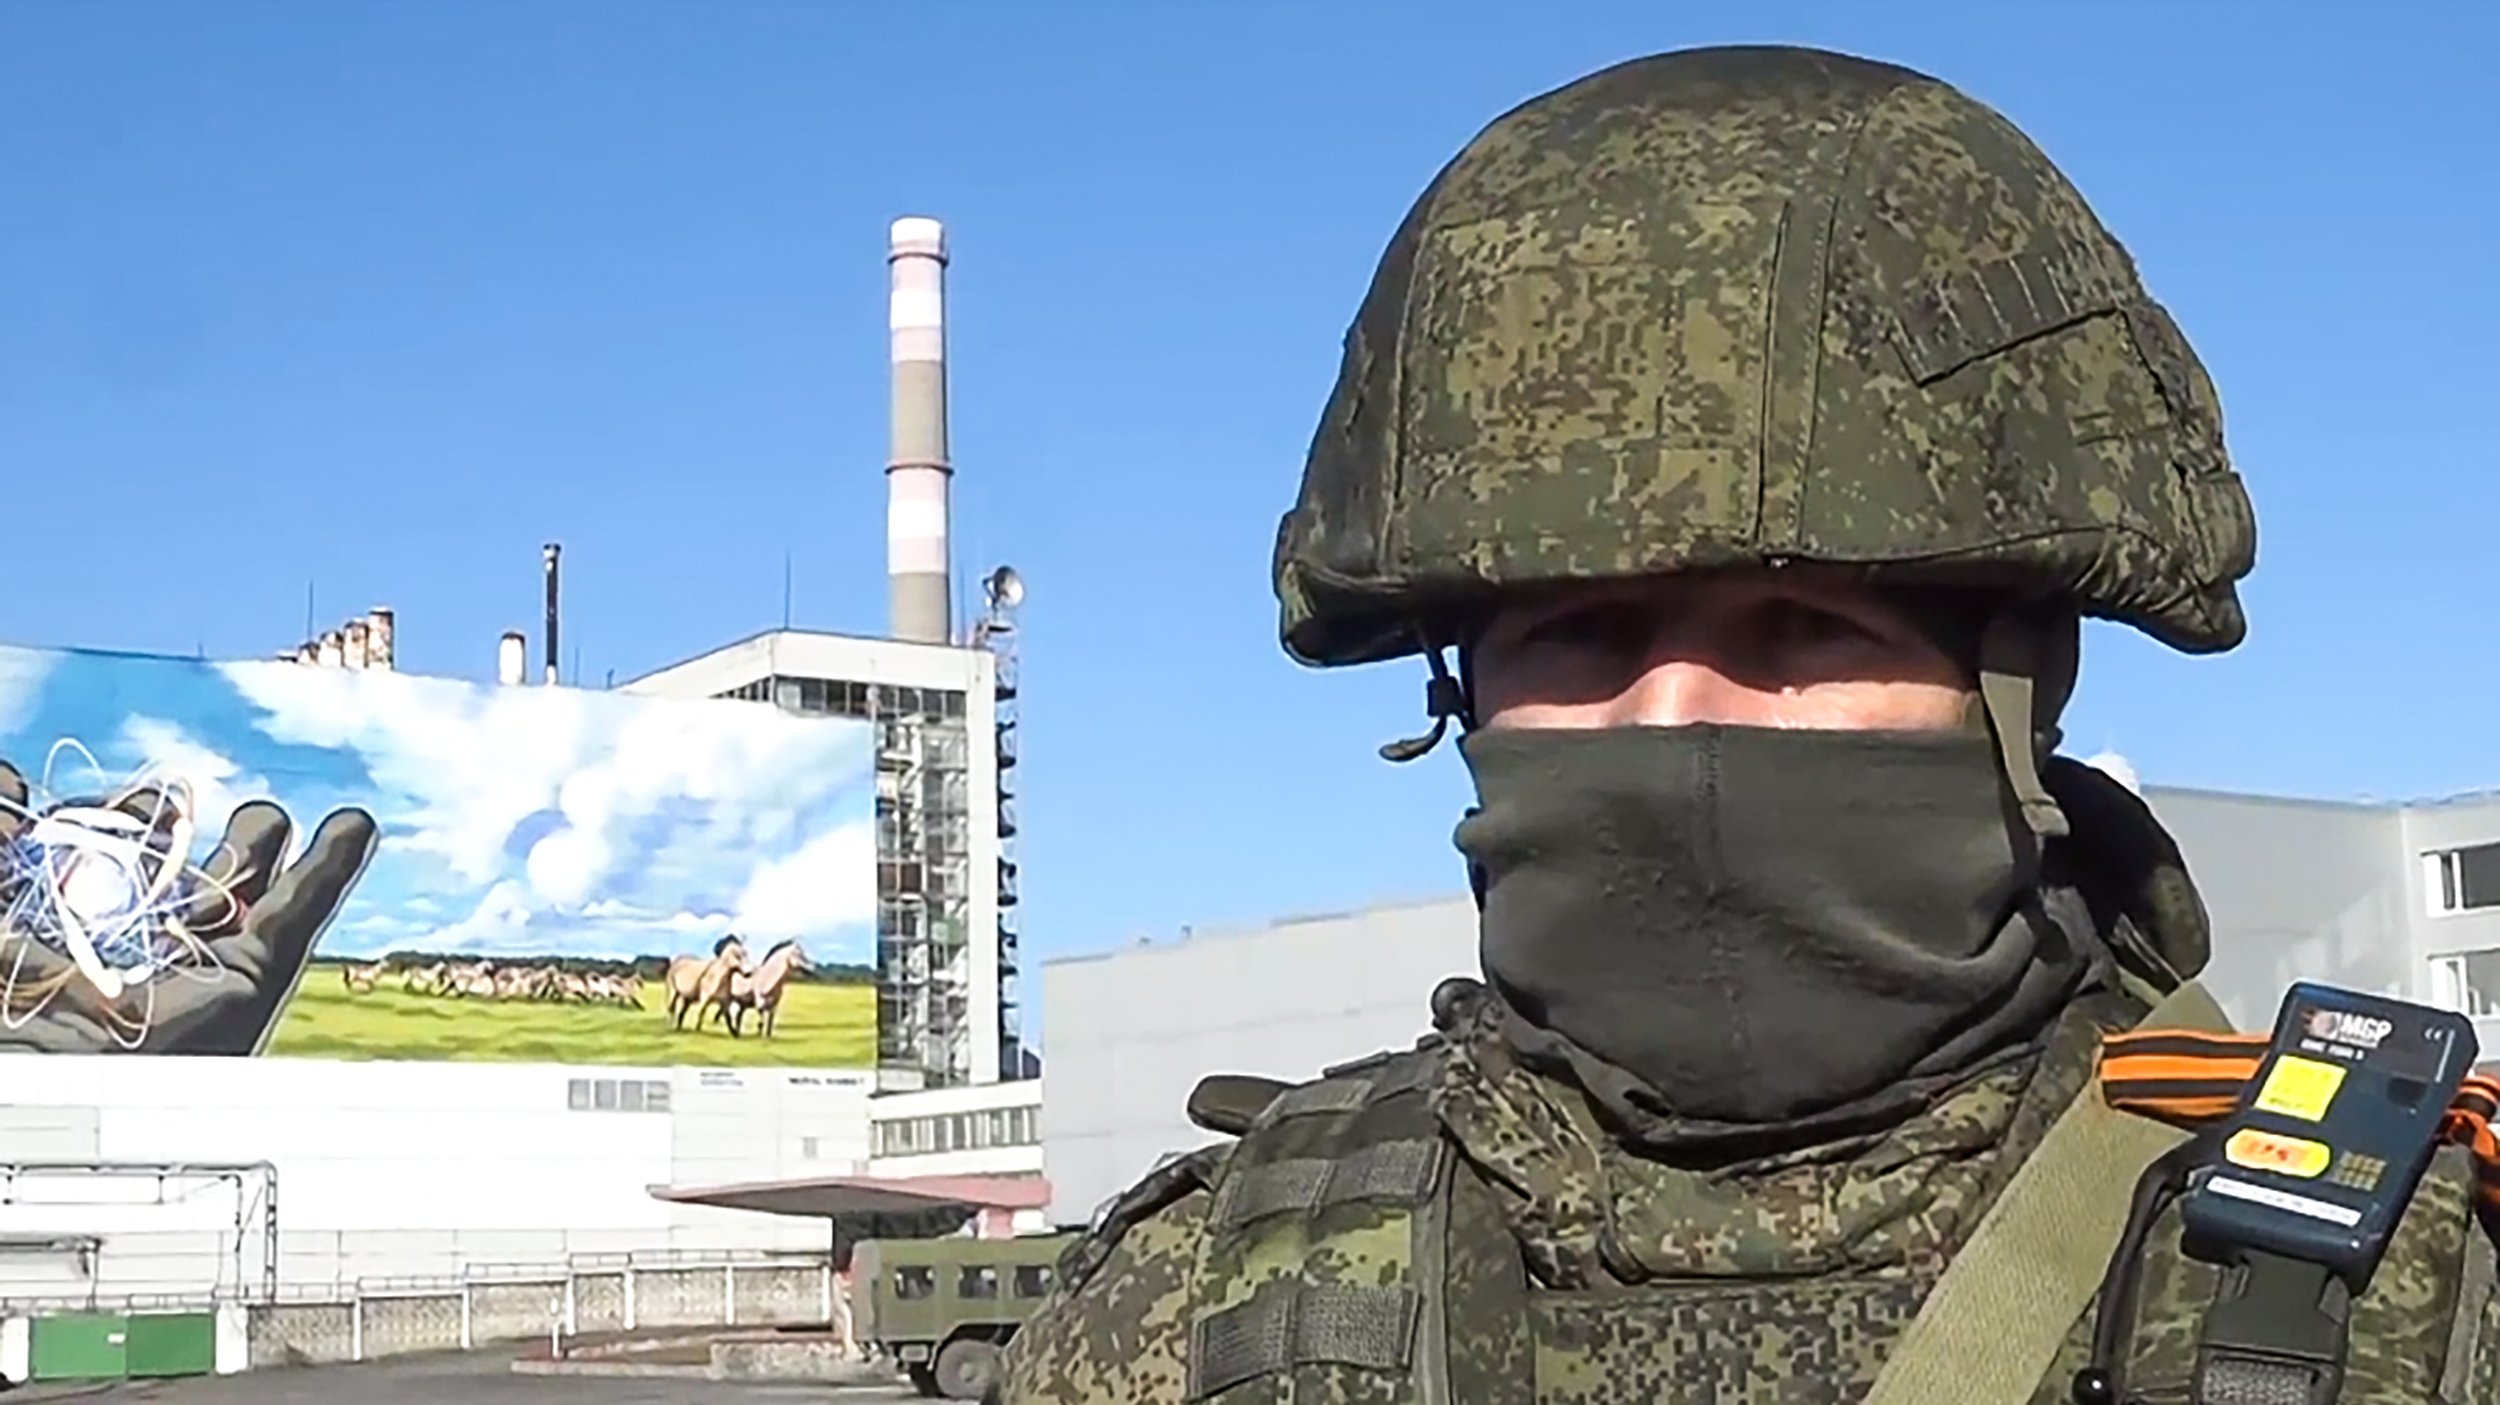 Chernobyl Nuclear Power Plant during special military operation